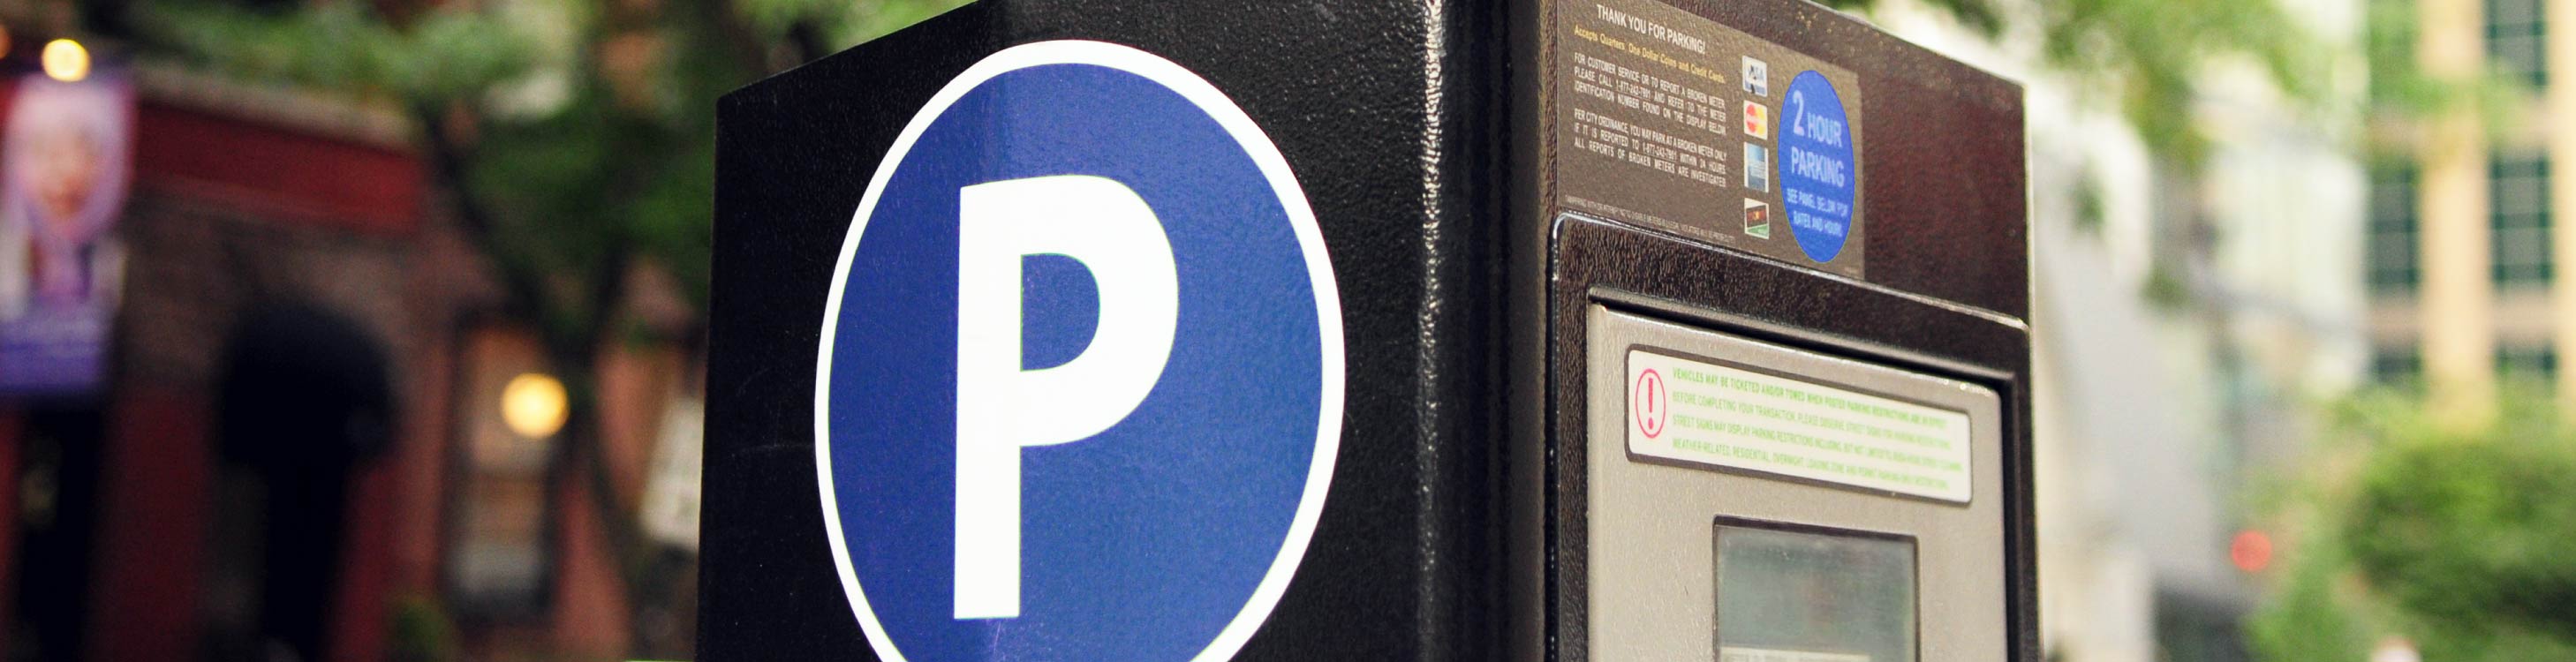 Boston auditing, overhauling its street parking system